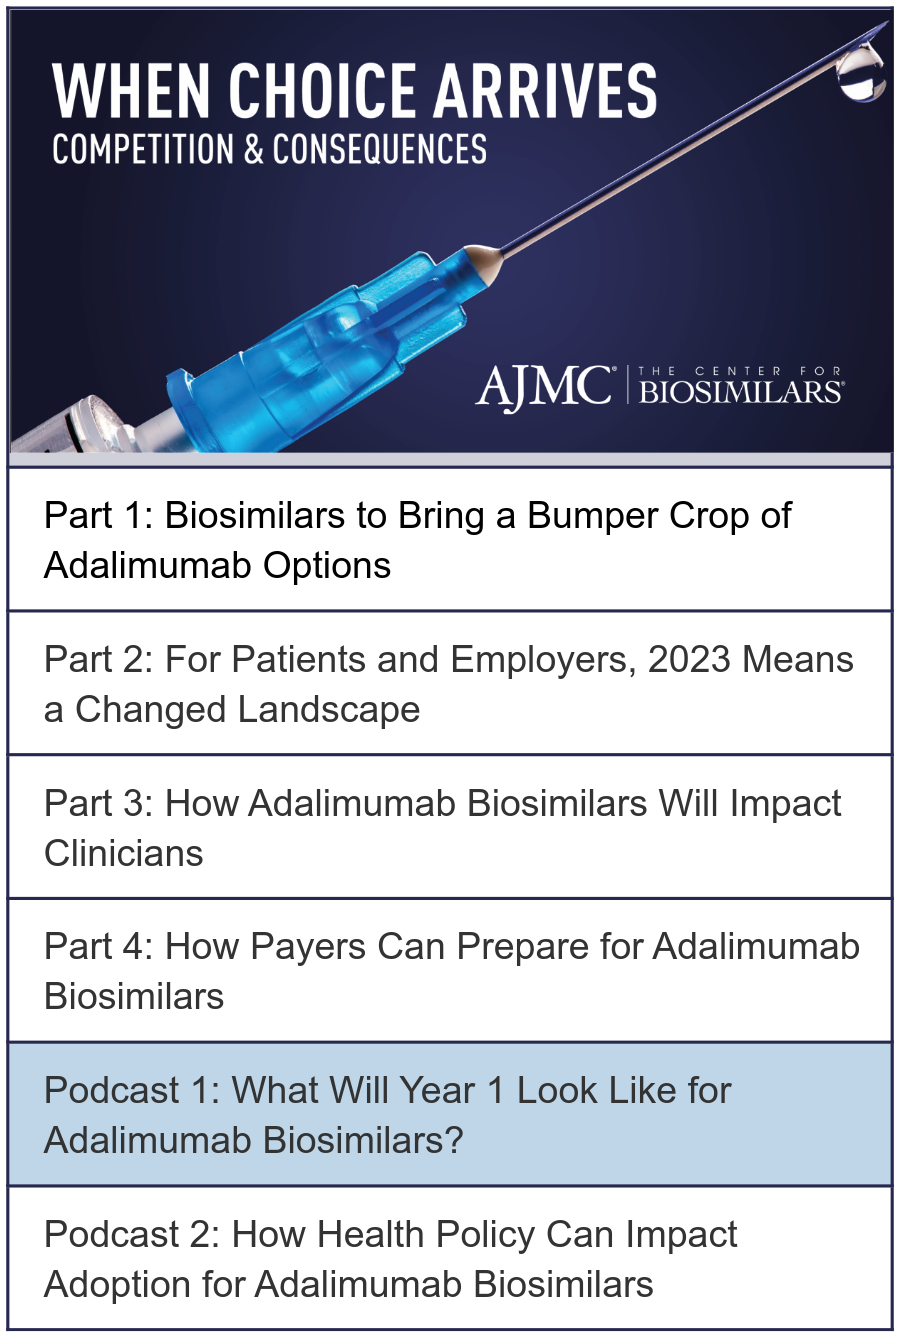 "When Choice Arrives: Competition & Consequences" written over a bright blue syringe with the AJMC/The Center for Biosimilars logo in the bottom right corner. Under the image is a list of 6 items (4 article titles and 2 podcasts). The first podcast item is highlighted.